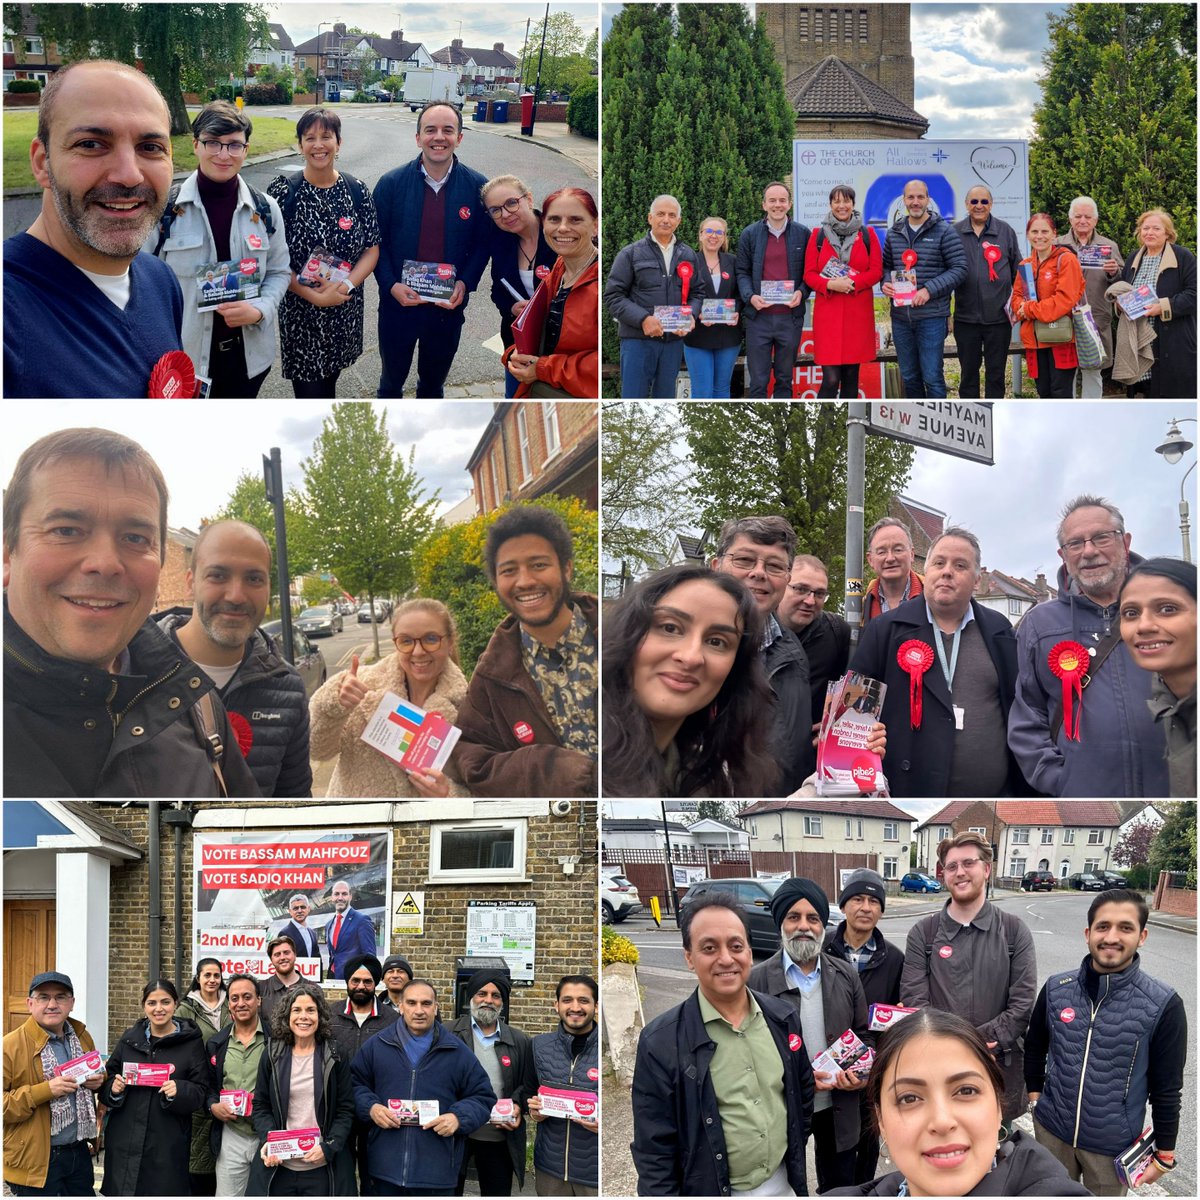 Fab #LabourDoorstep with @ellyannab @jamesmurray_ldn & the brill teams across #Ealing & #Hillingdon 🌹A progressive coalition supporting @SadiqKhan for Mayor and me as Assembly Member 🛑 Stop divisive Tories who have mismanaged the economy & will take food away from our kids